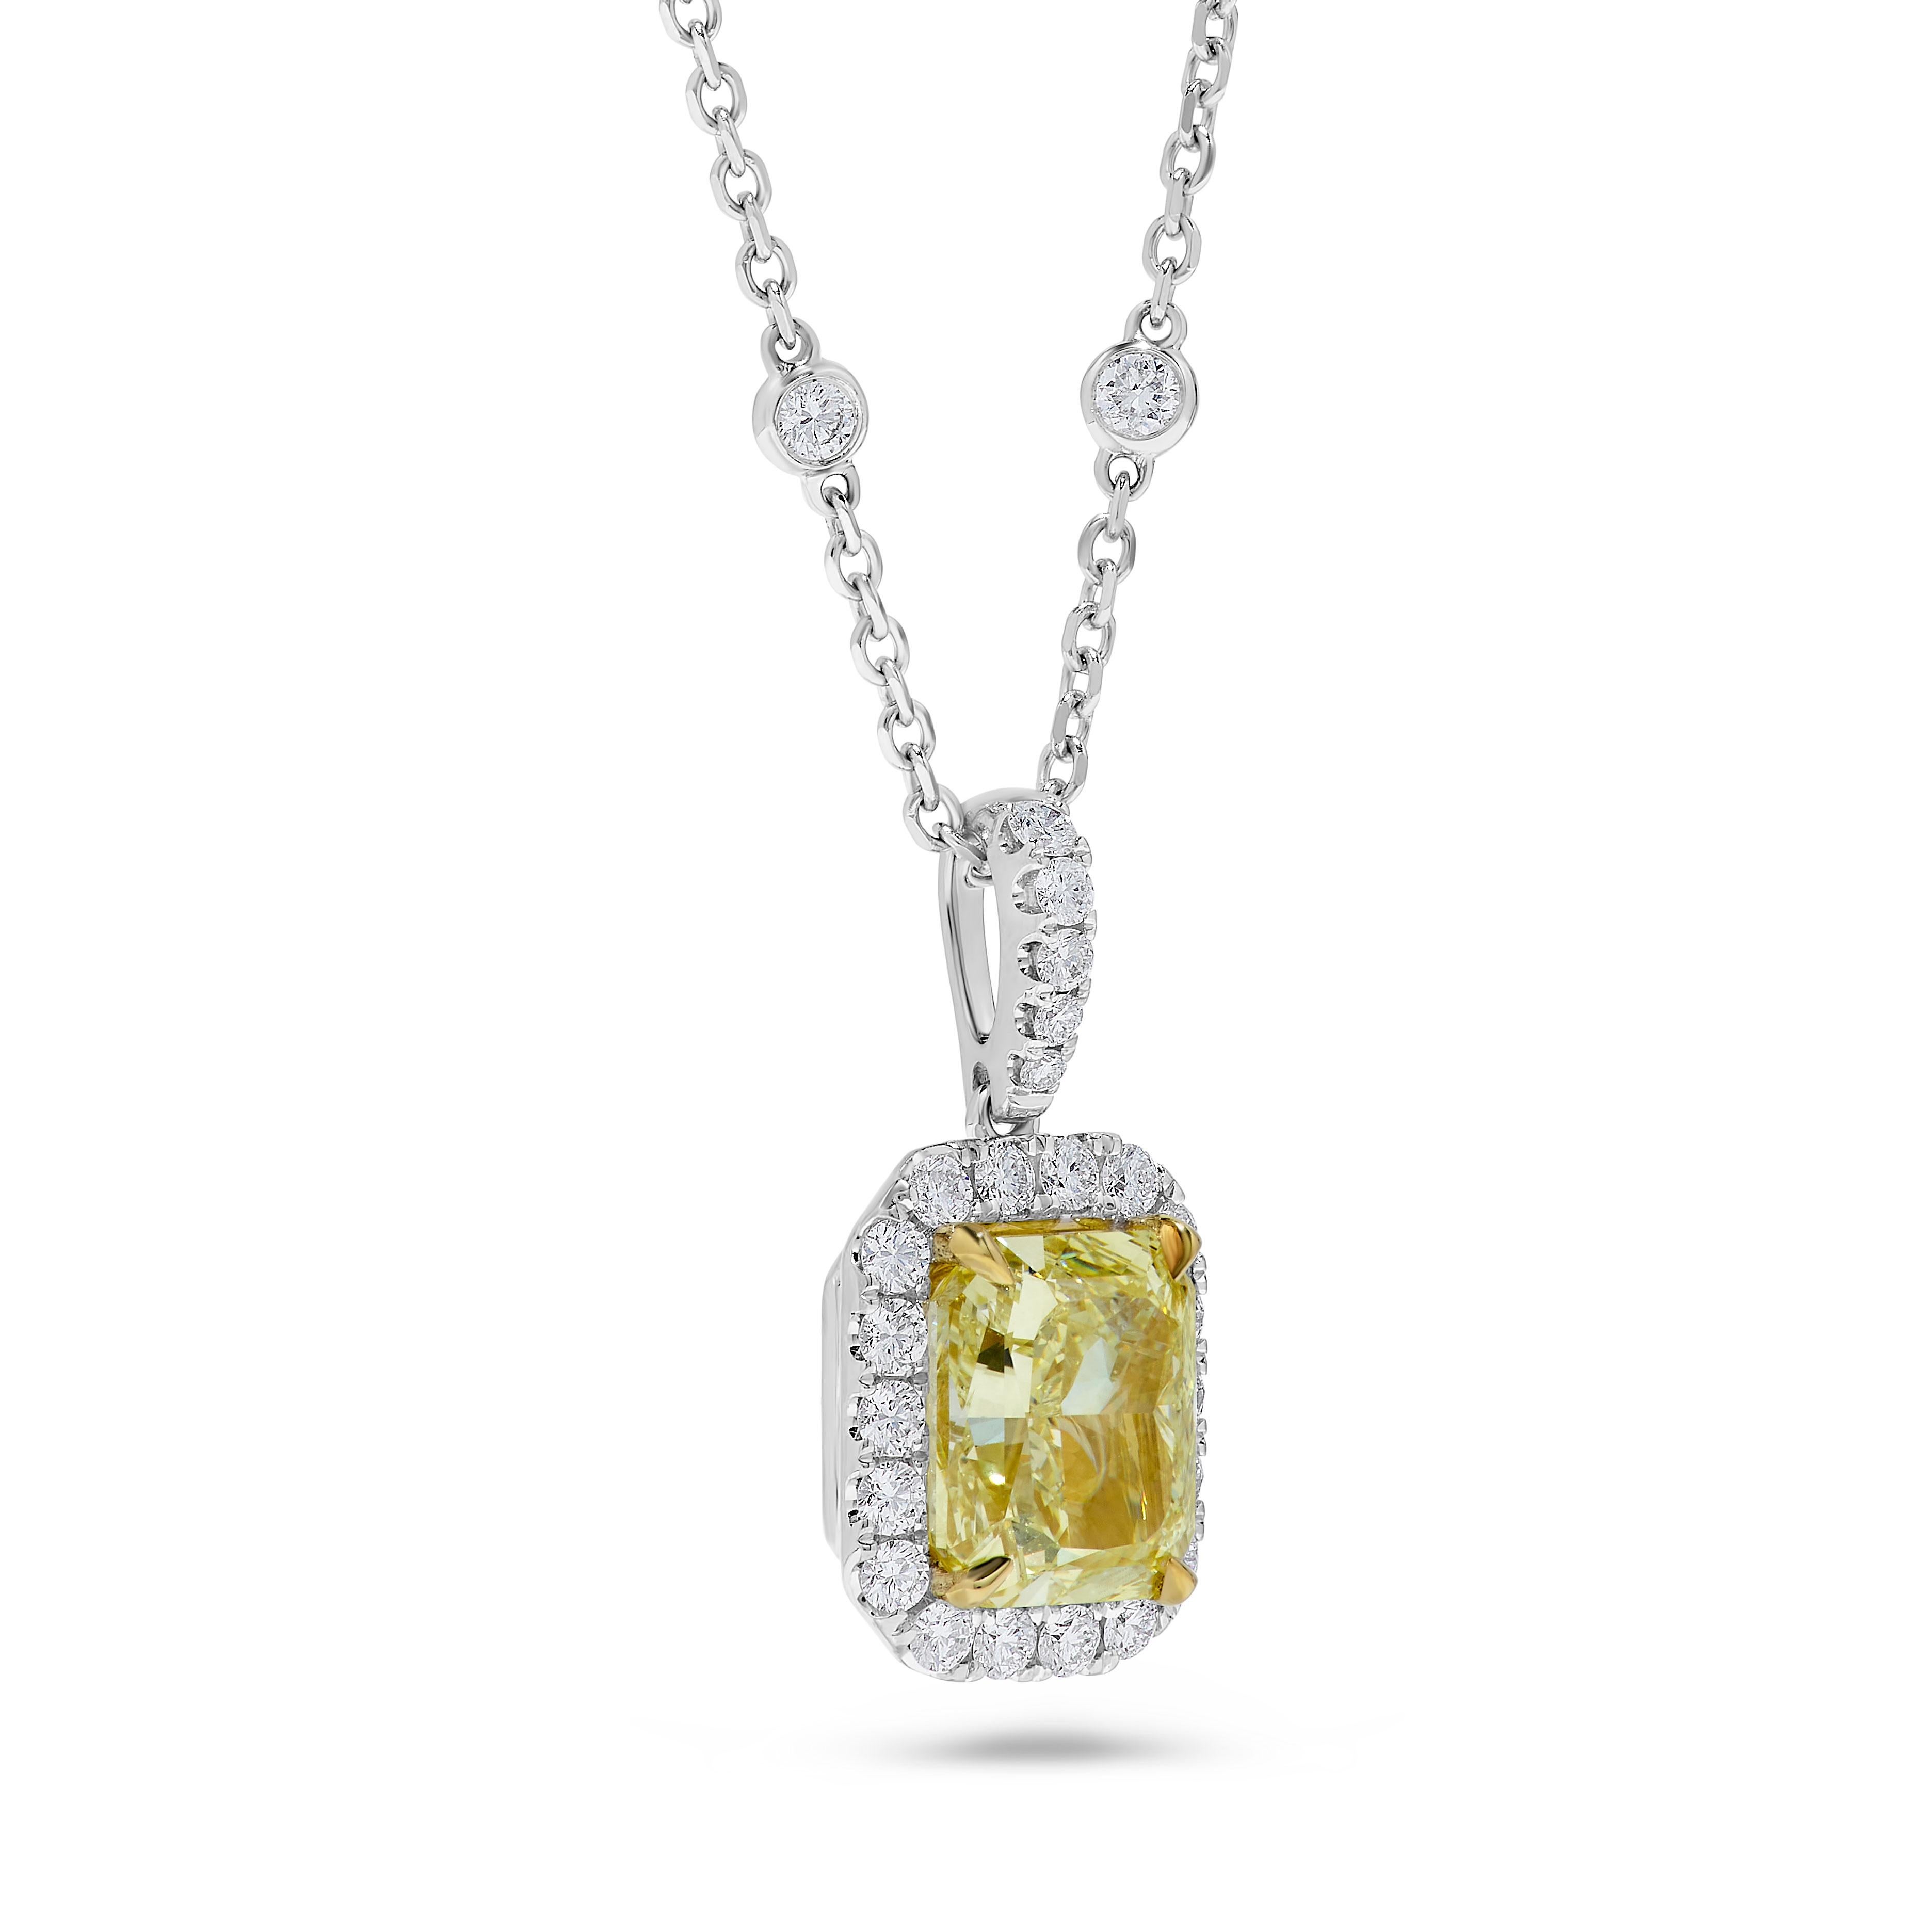 Radiant Cut GIA Certified Natural Yellow Radiant Diamond 3.44 Carat TW Gold Drop Pendant For Sale